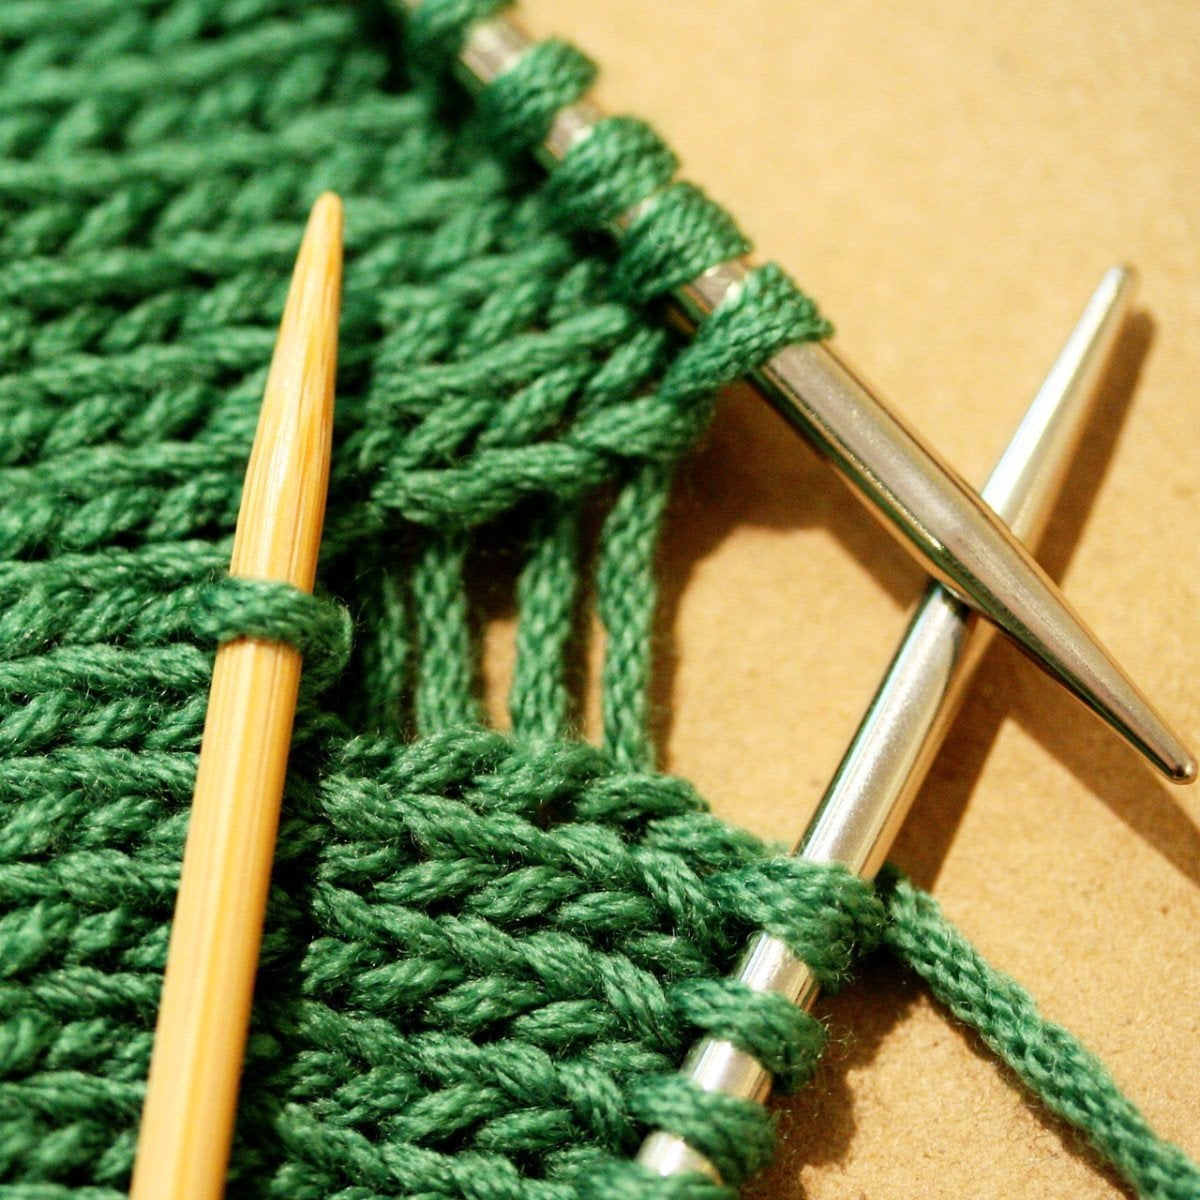 gather here classes - Fixing Knitting Mistakes - Default - gatherhereonline.com